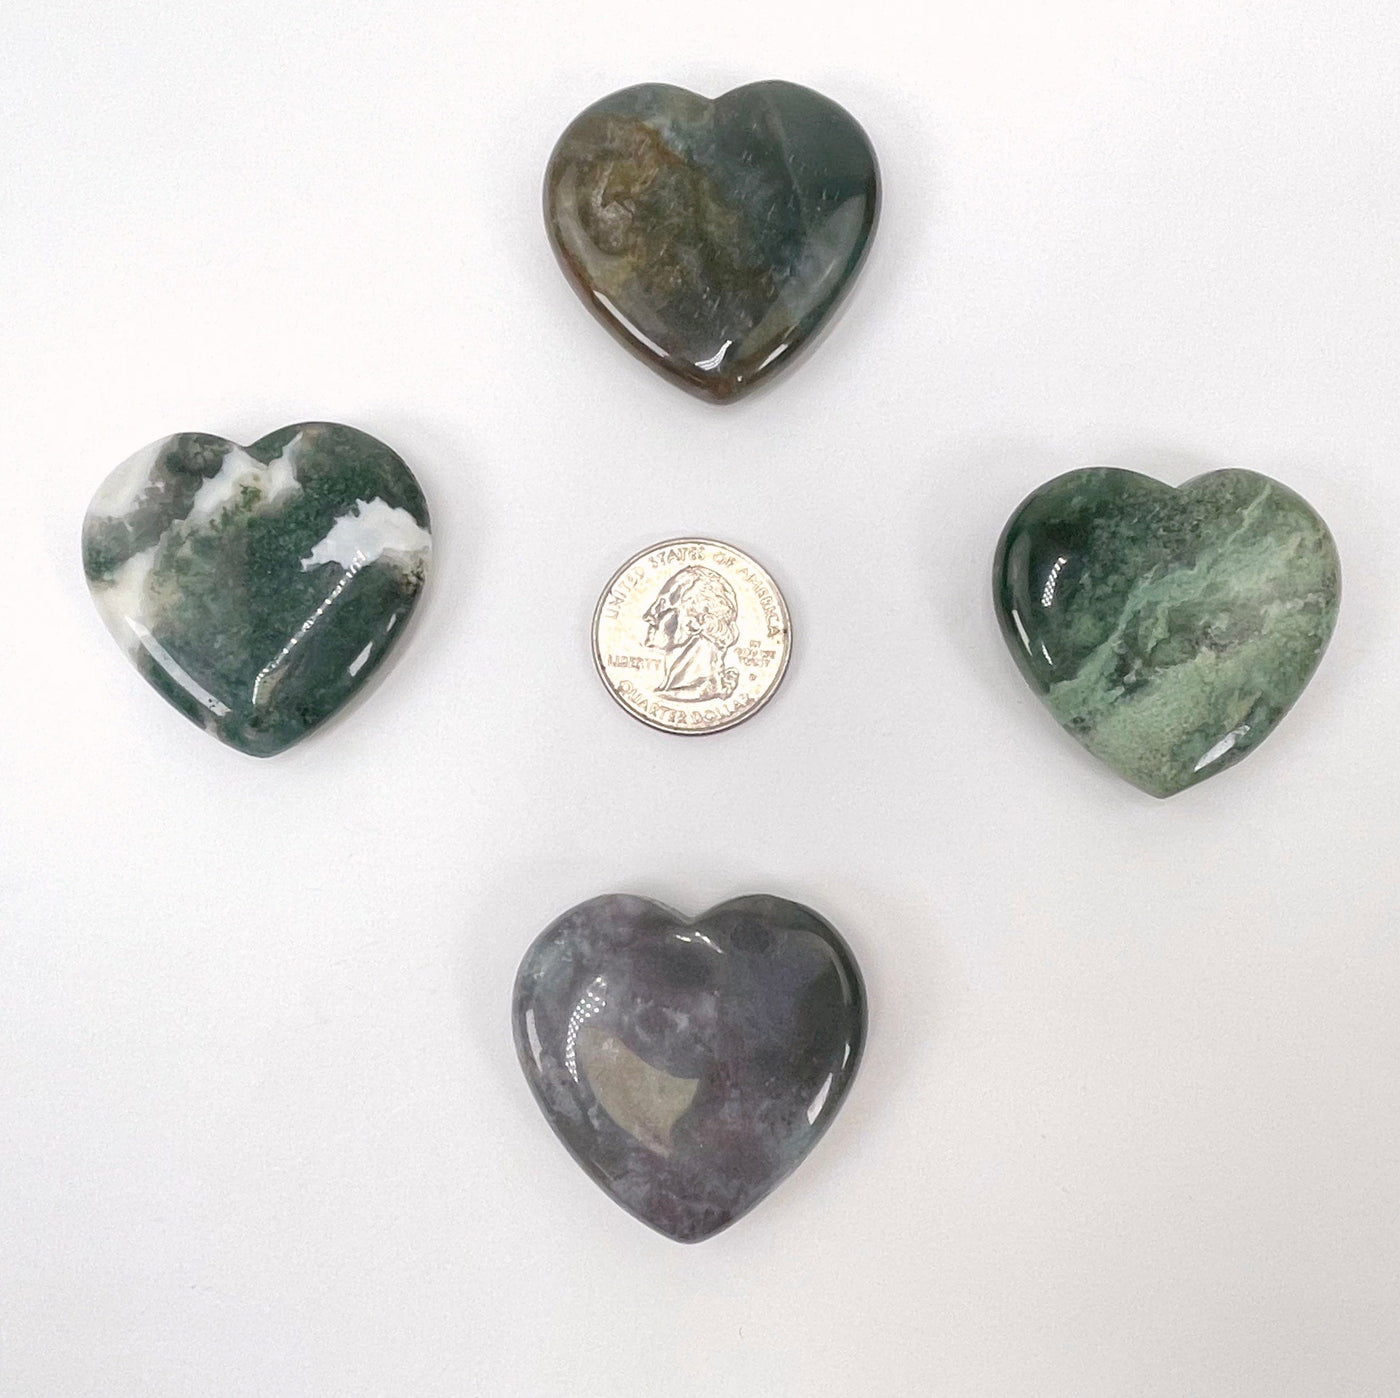 moss agate polished hearts with quarter for size reference